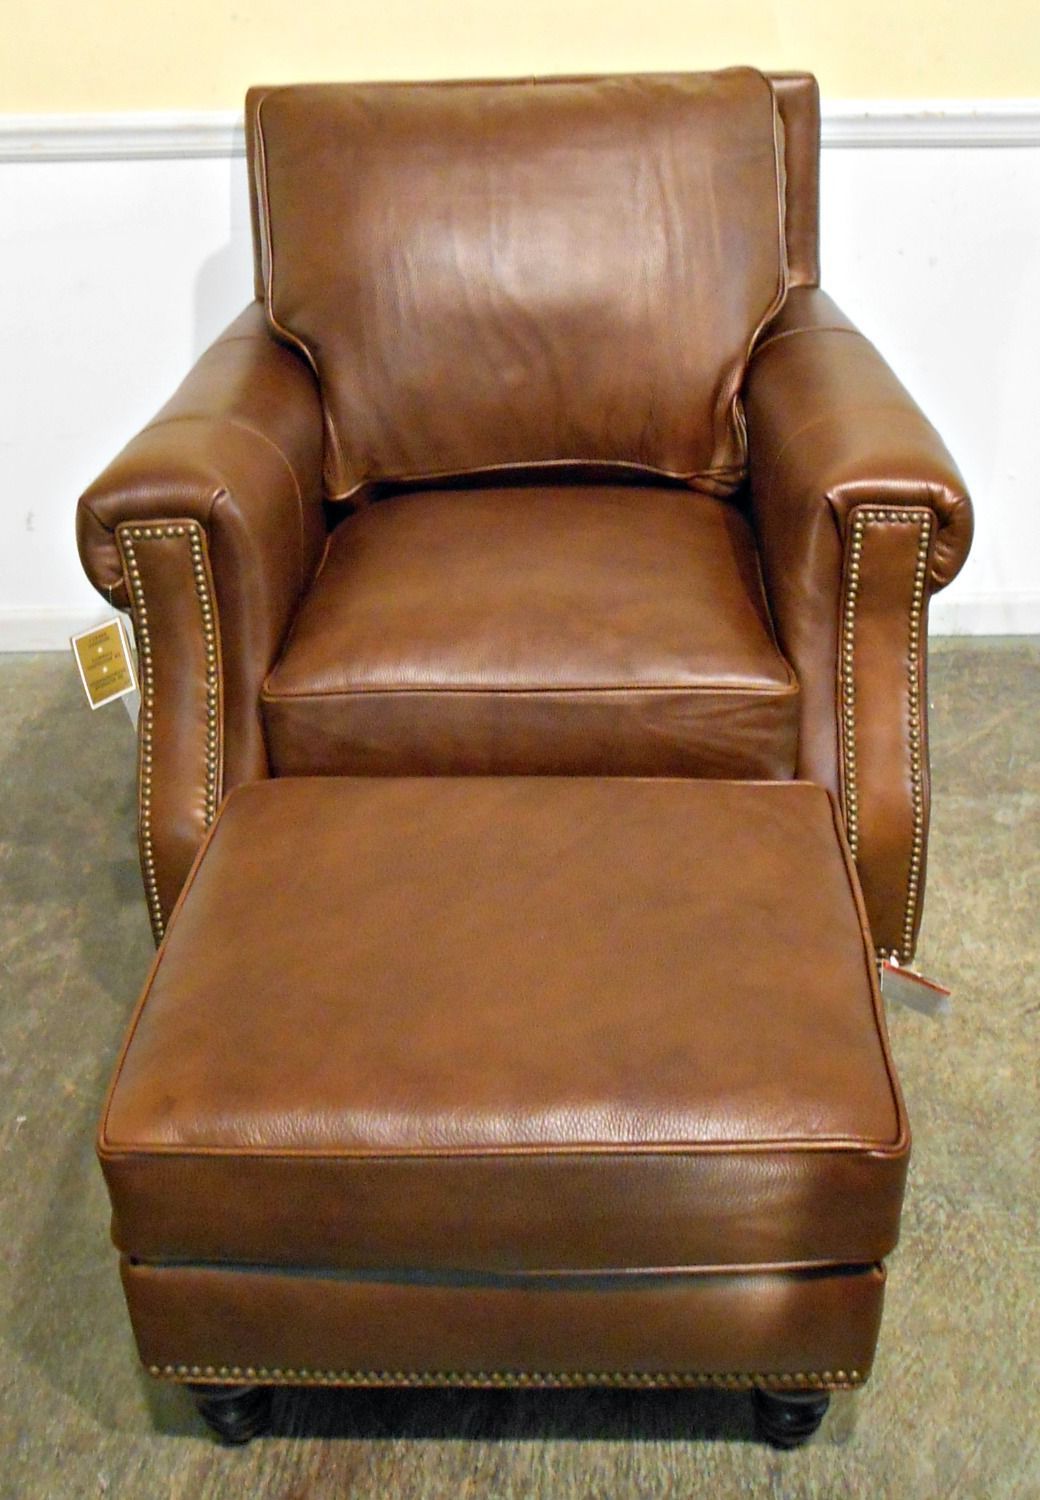 3104 394 Bradington Young Medium Brown Leather Chair & Ottman #71395 In Current Medium Brown Leather Folding Stools (View 7 of 10)